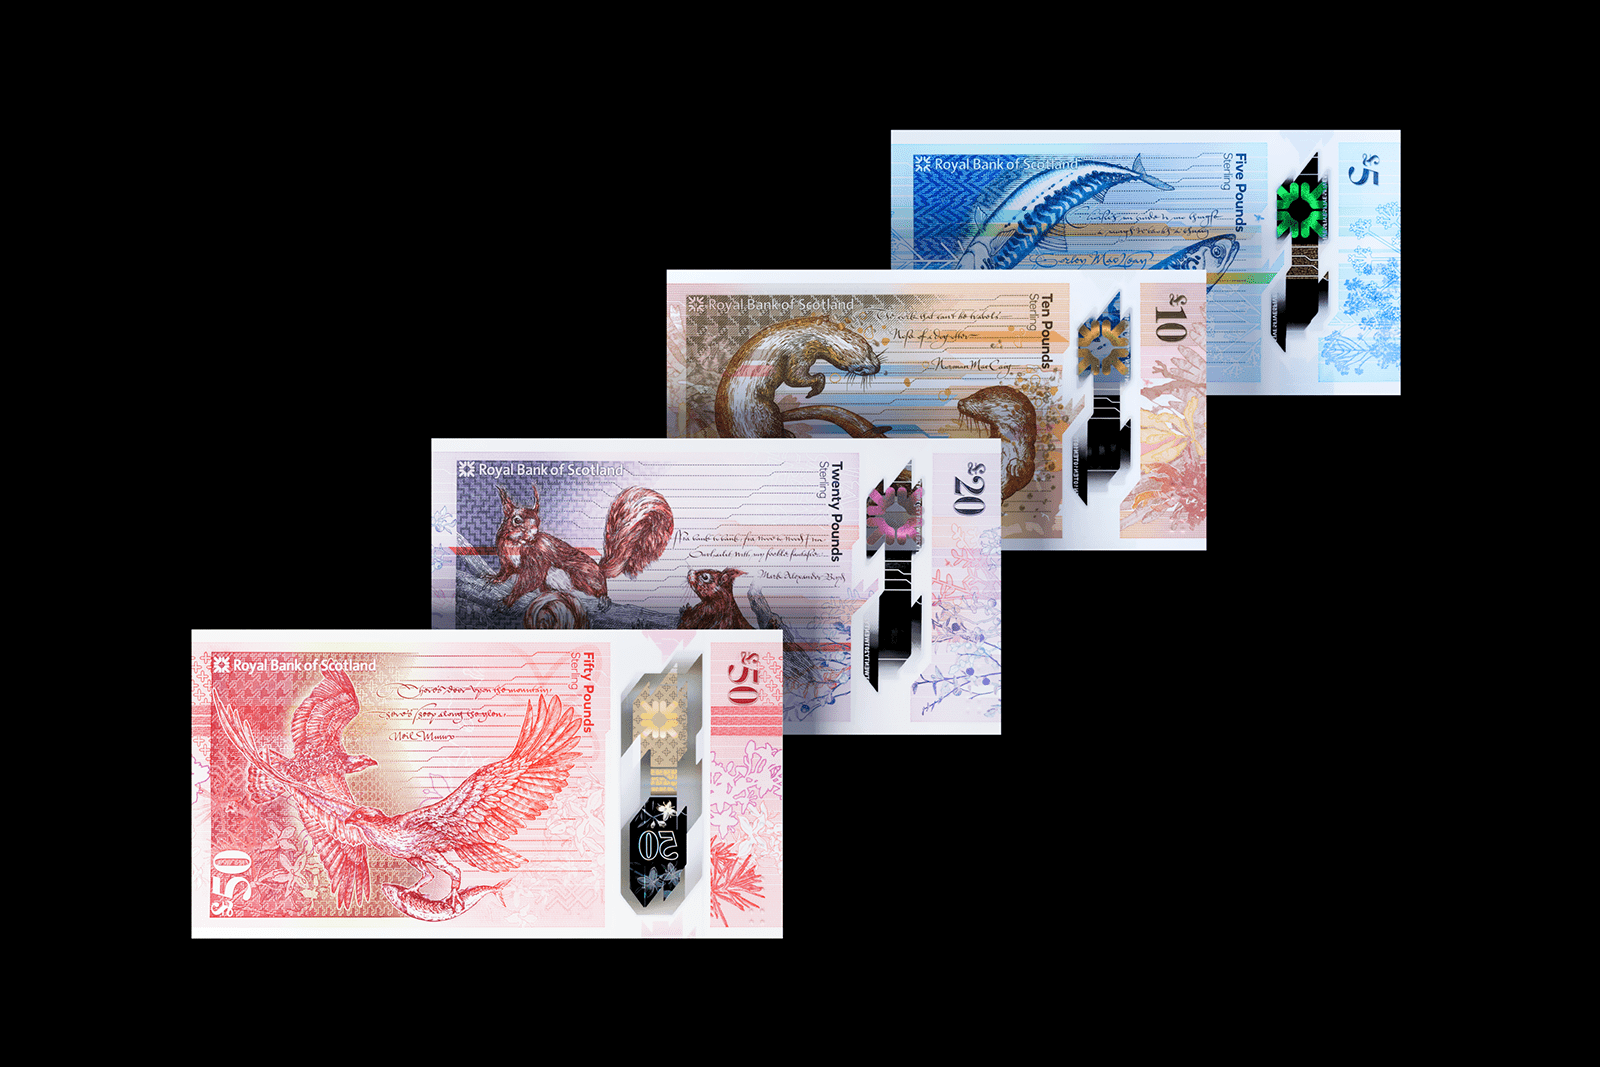 Royal Bank of Scotland new polymer Banknotes in £5,£10,£20 and £50 note denominations. Currency design by Scottish Design Agency, O Street